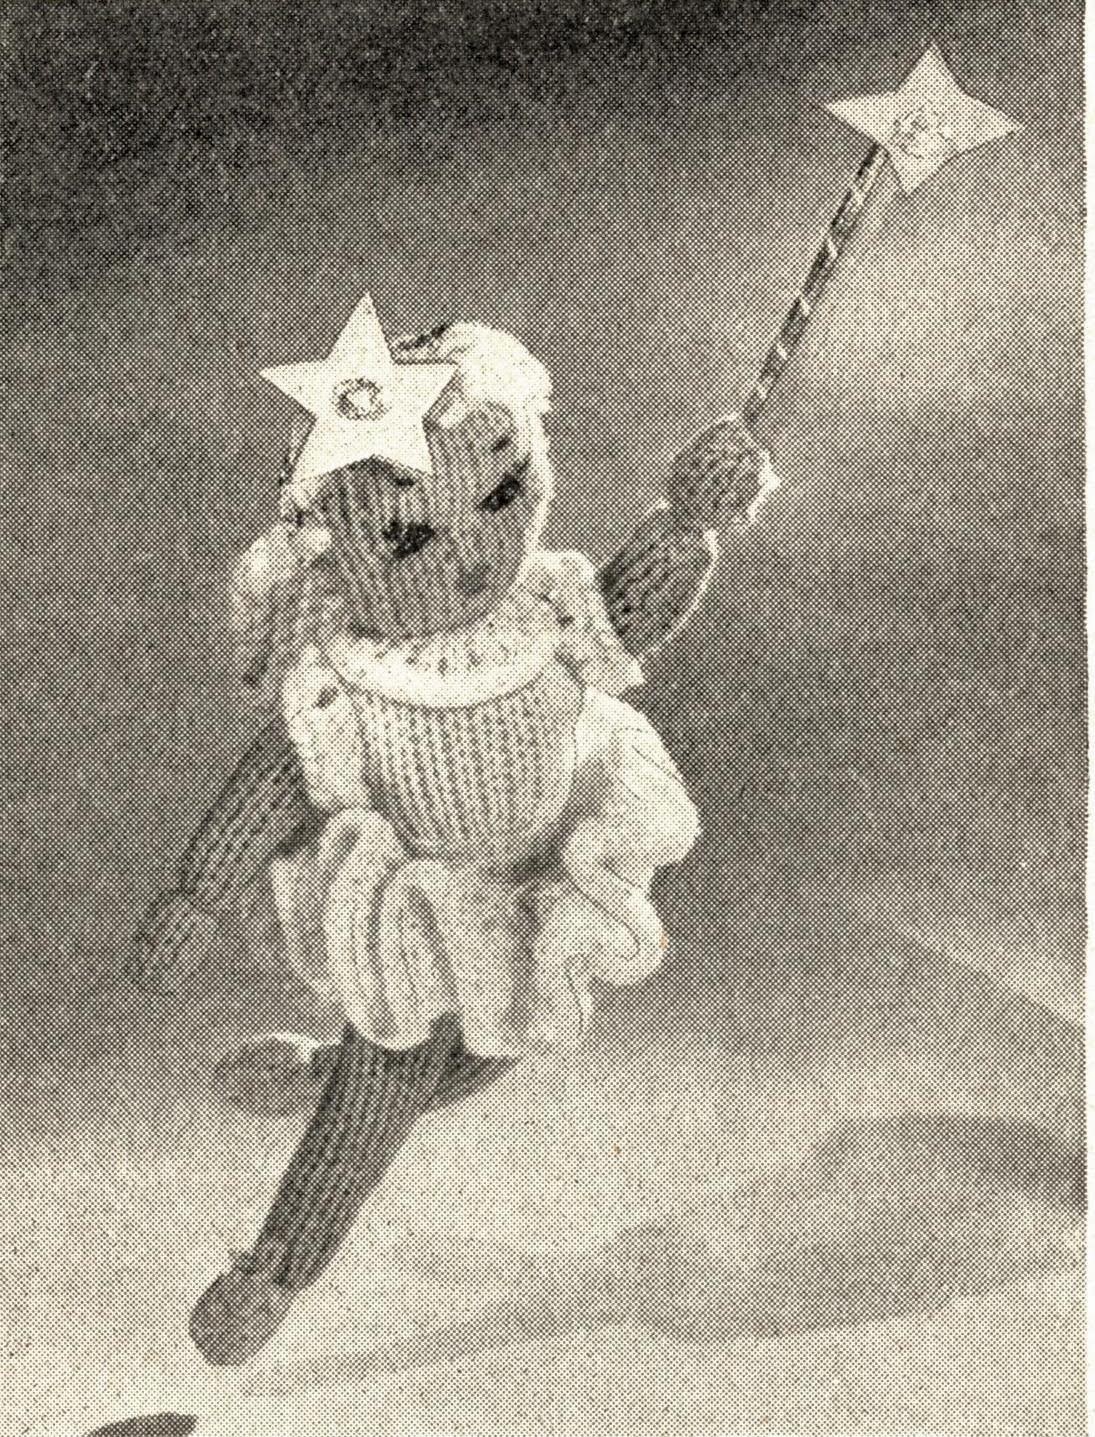 A Knitted Fairy Topper for Christmas - c. December 1952 ...